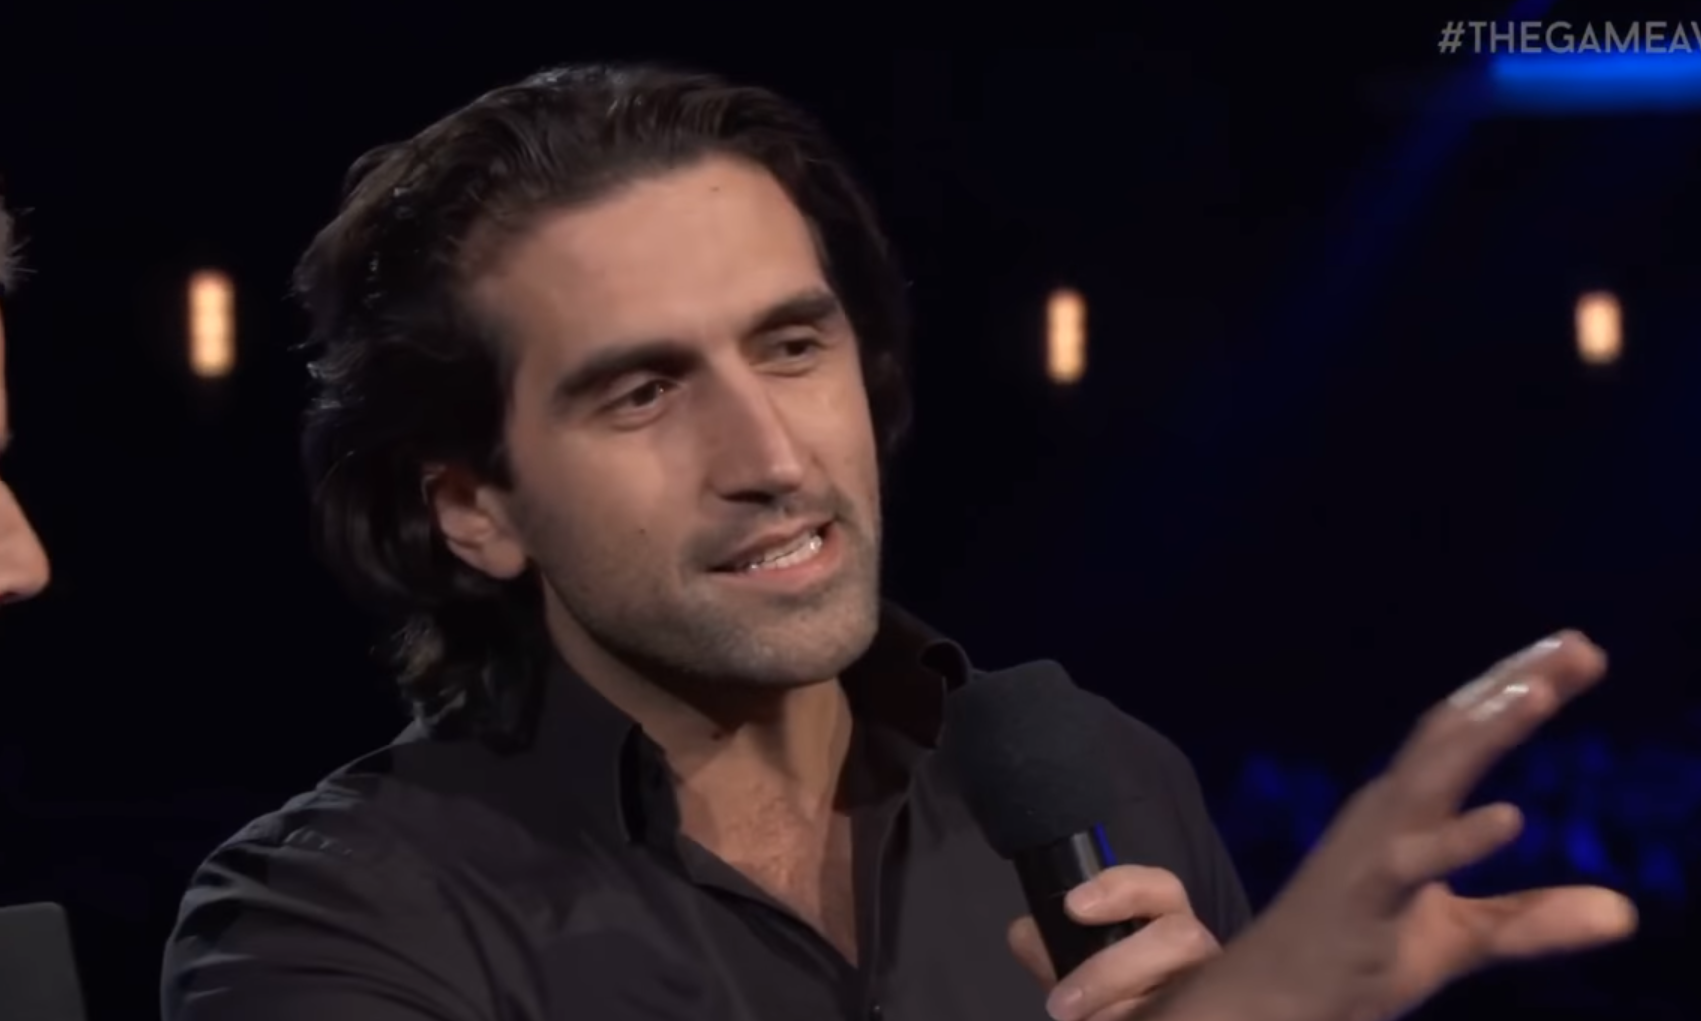 Image for Best of 2018: From a warzone to video game development - how life taught A Way Out director Josef Fares to “fuck shit up”